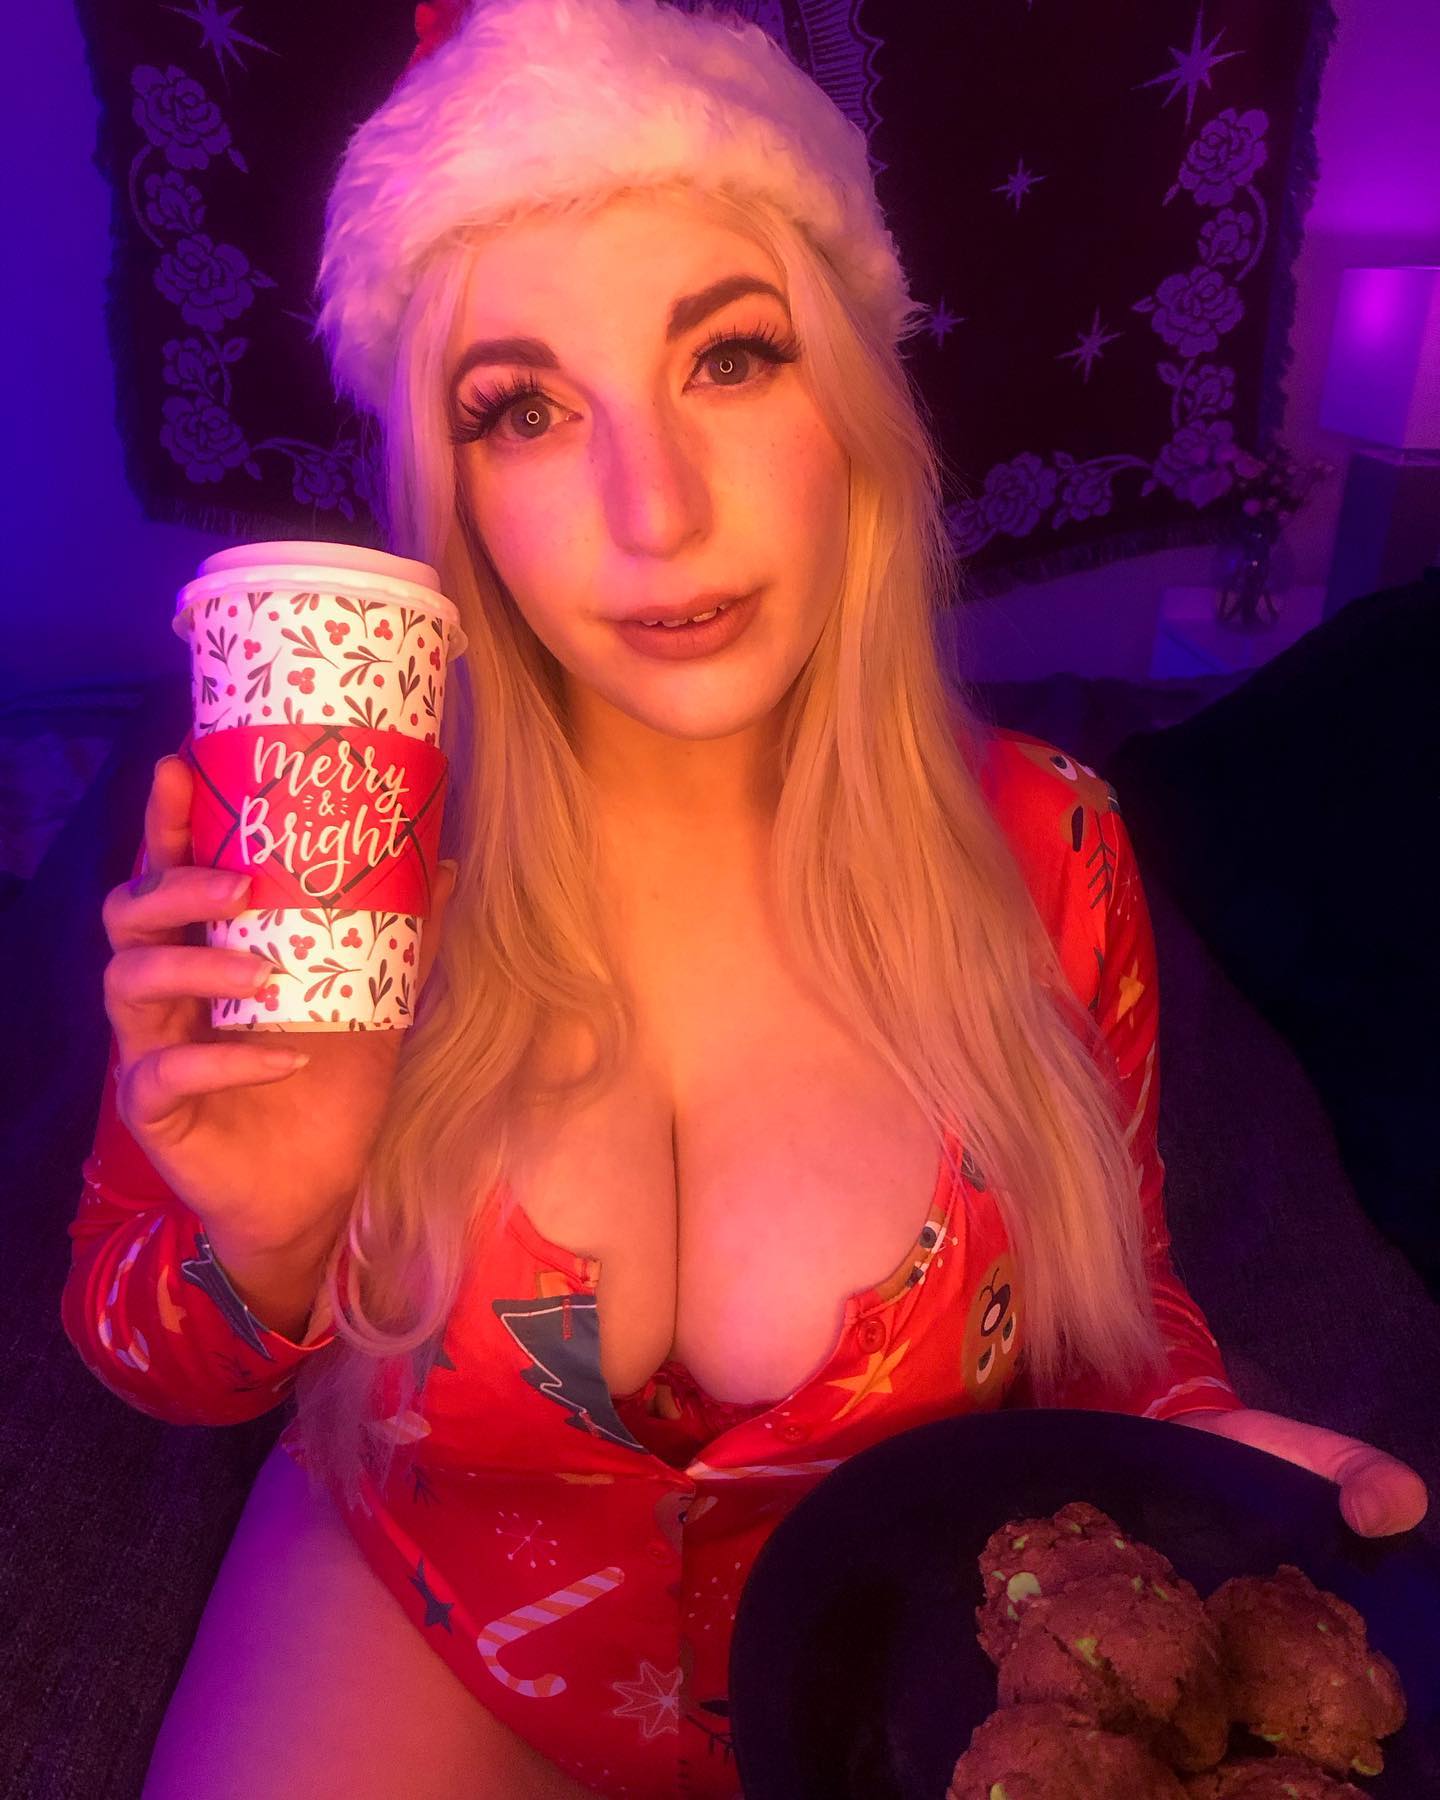 POV: You come down the chimney on Christmas Eve to find me waiting with hot fresh coffee and chocolate mint chip cookies. What do you do?